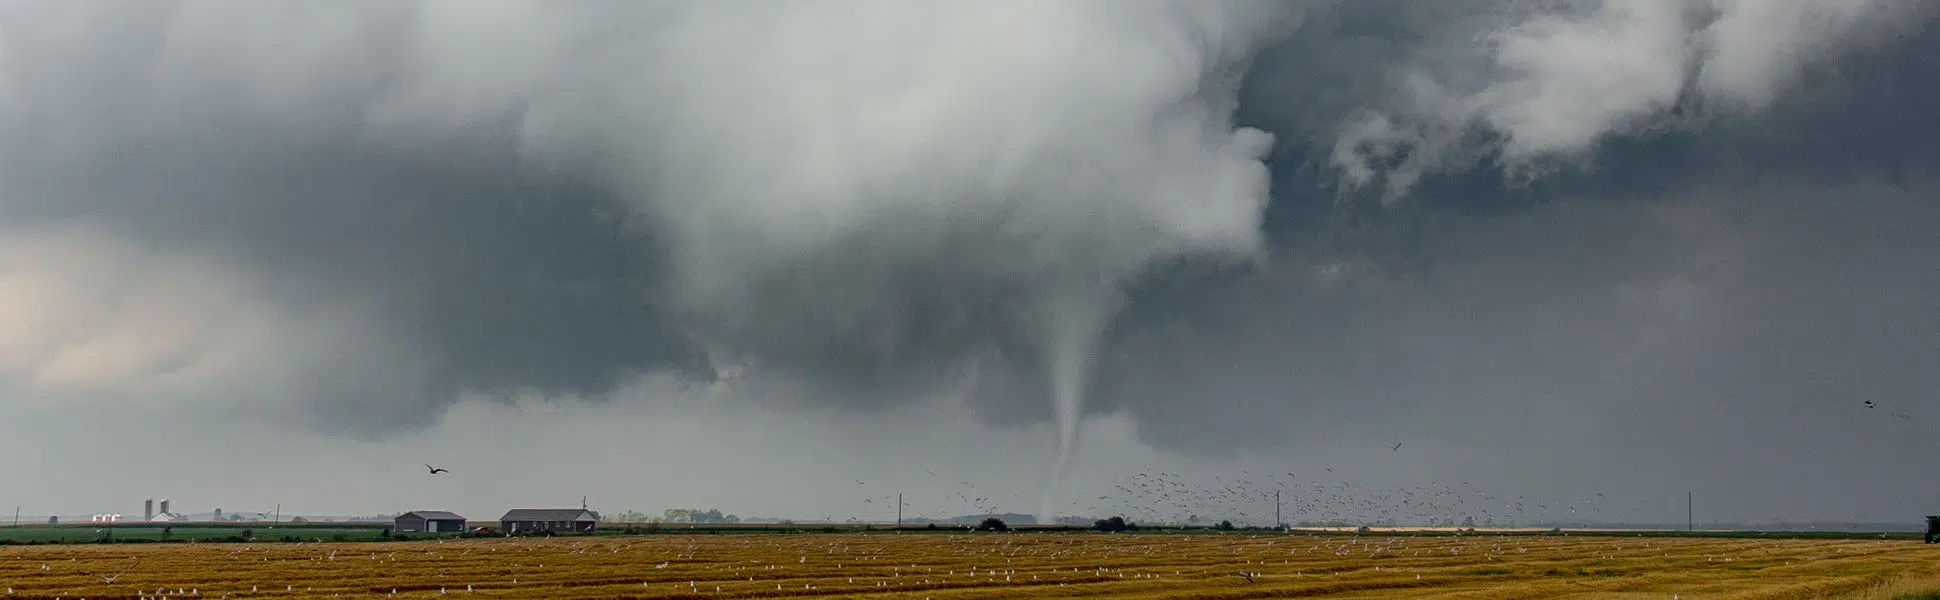 Ontario based "Northern Tornadoes Project" calling on citizen scientists to report tornadoes this summer